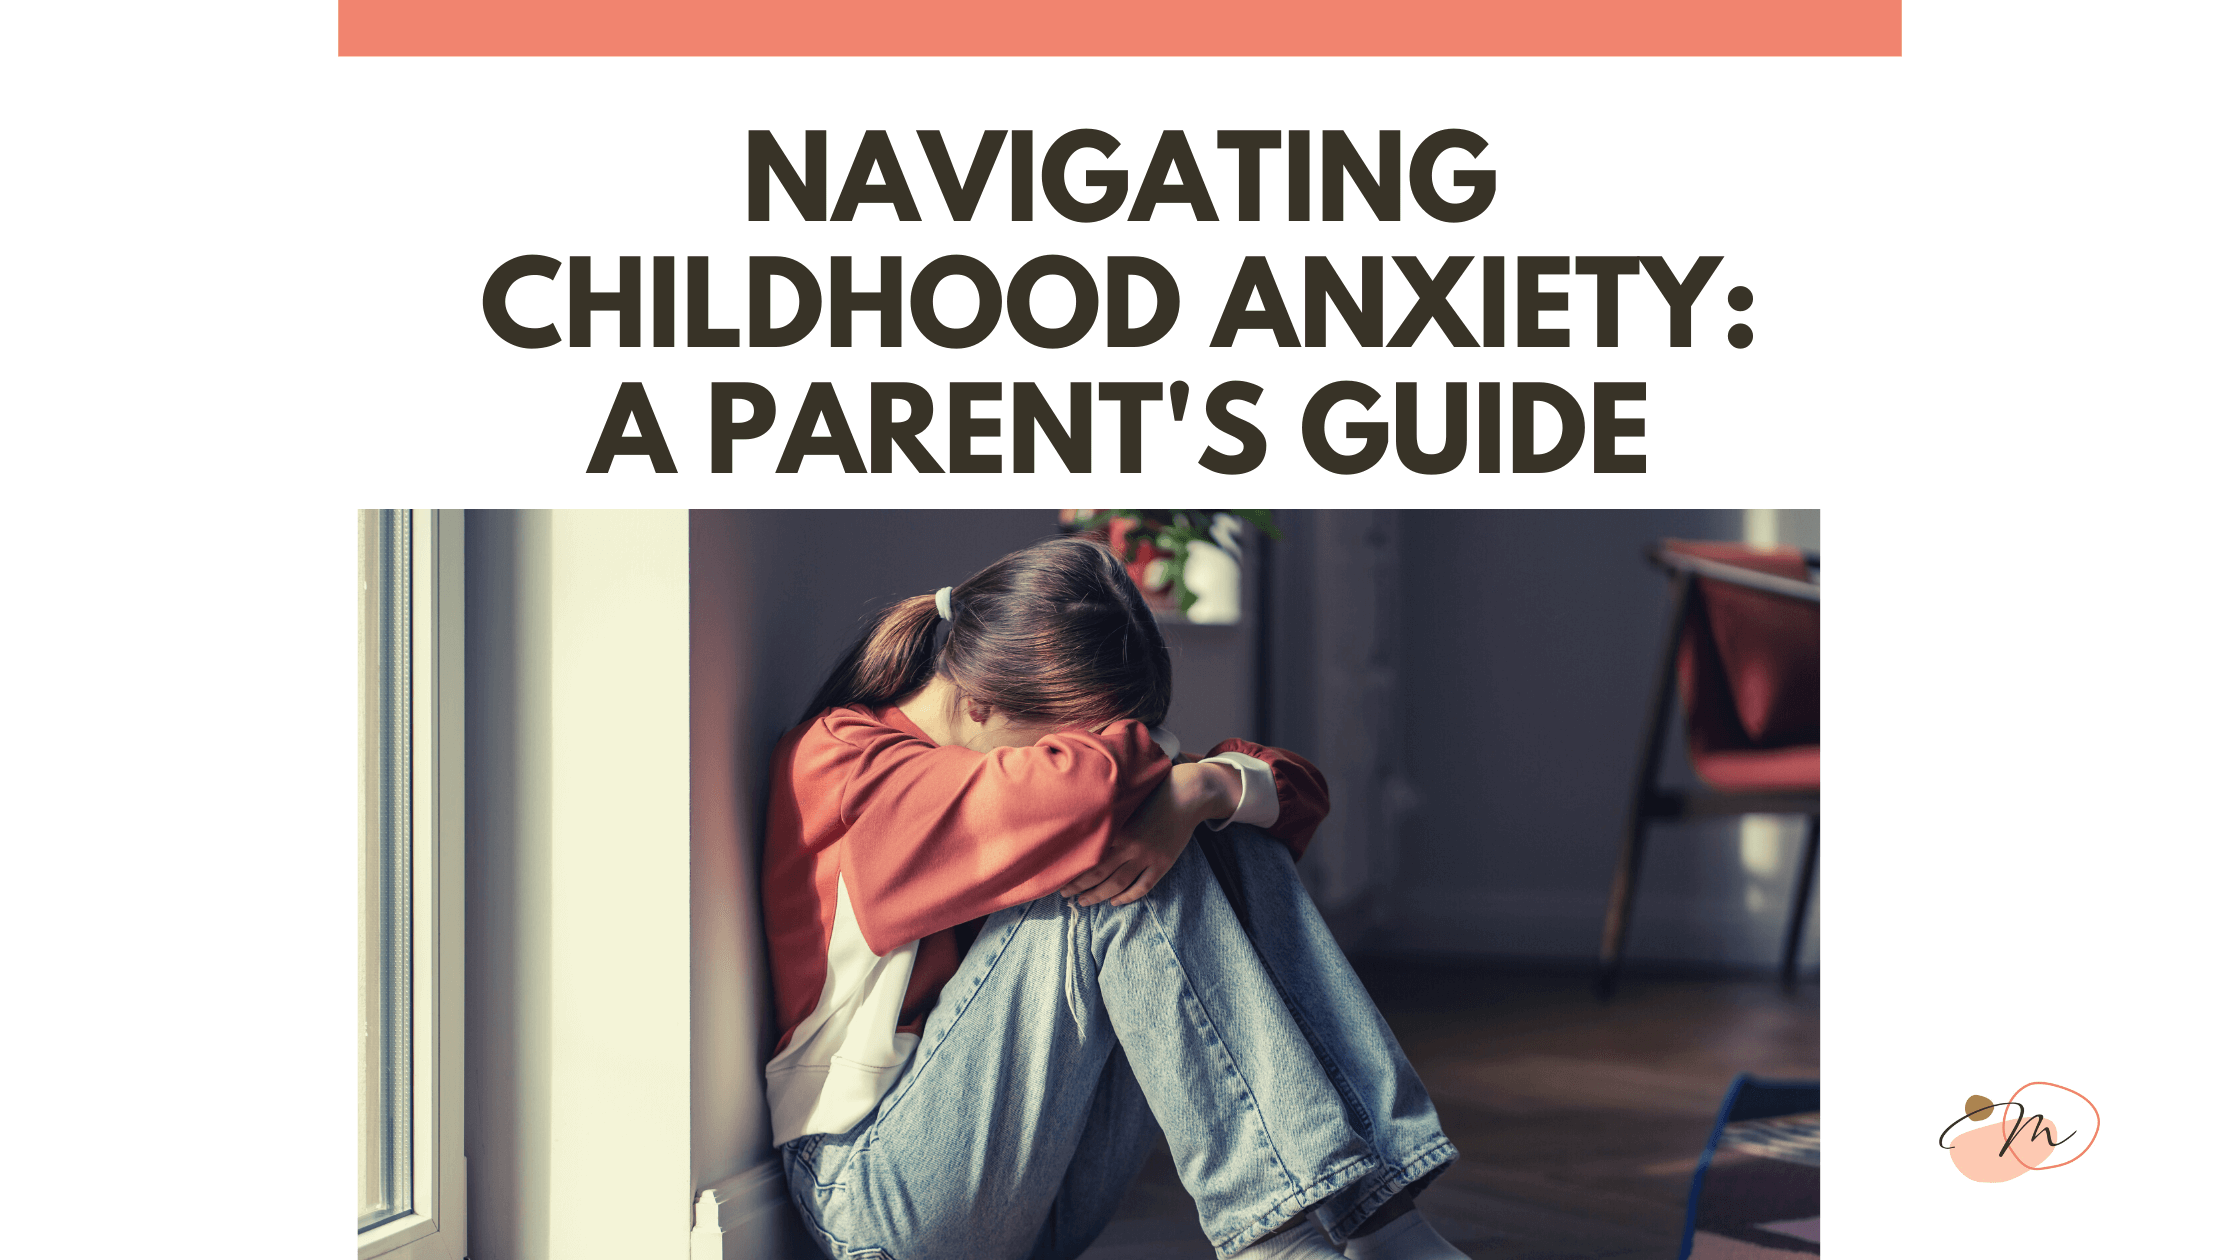 Navigating Childhood Anxiety: A Parent’s Guide